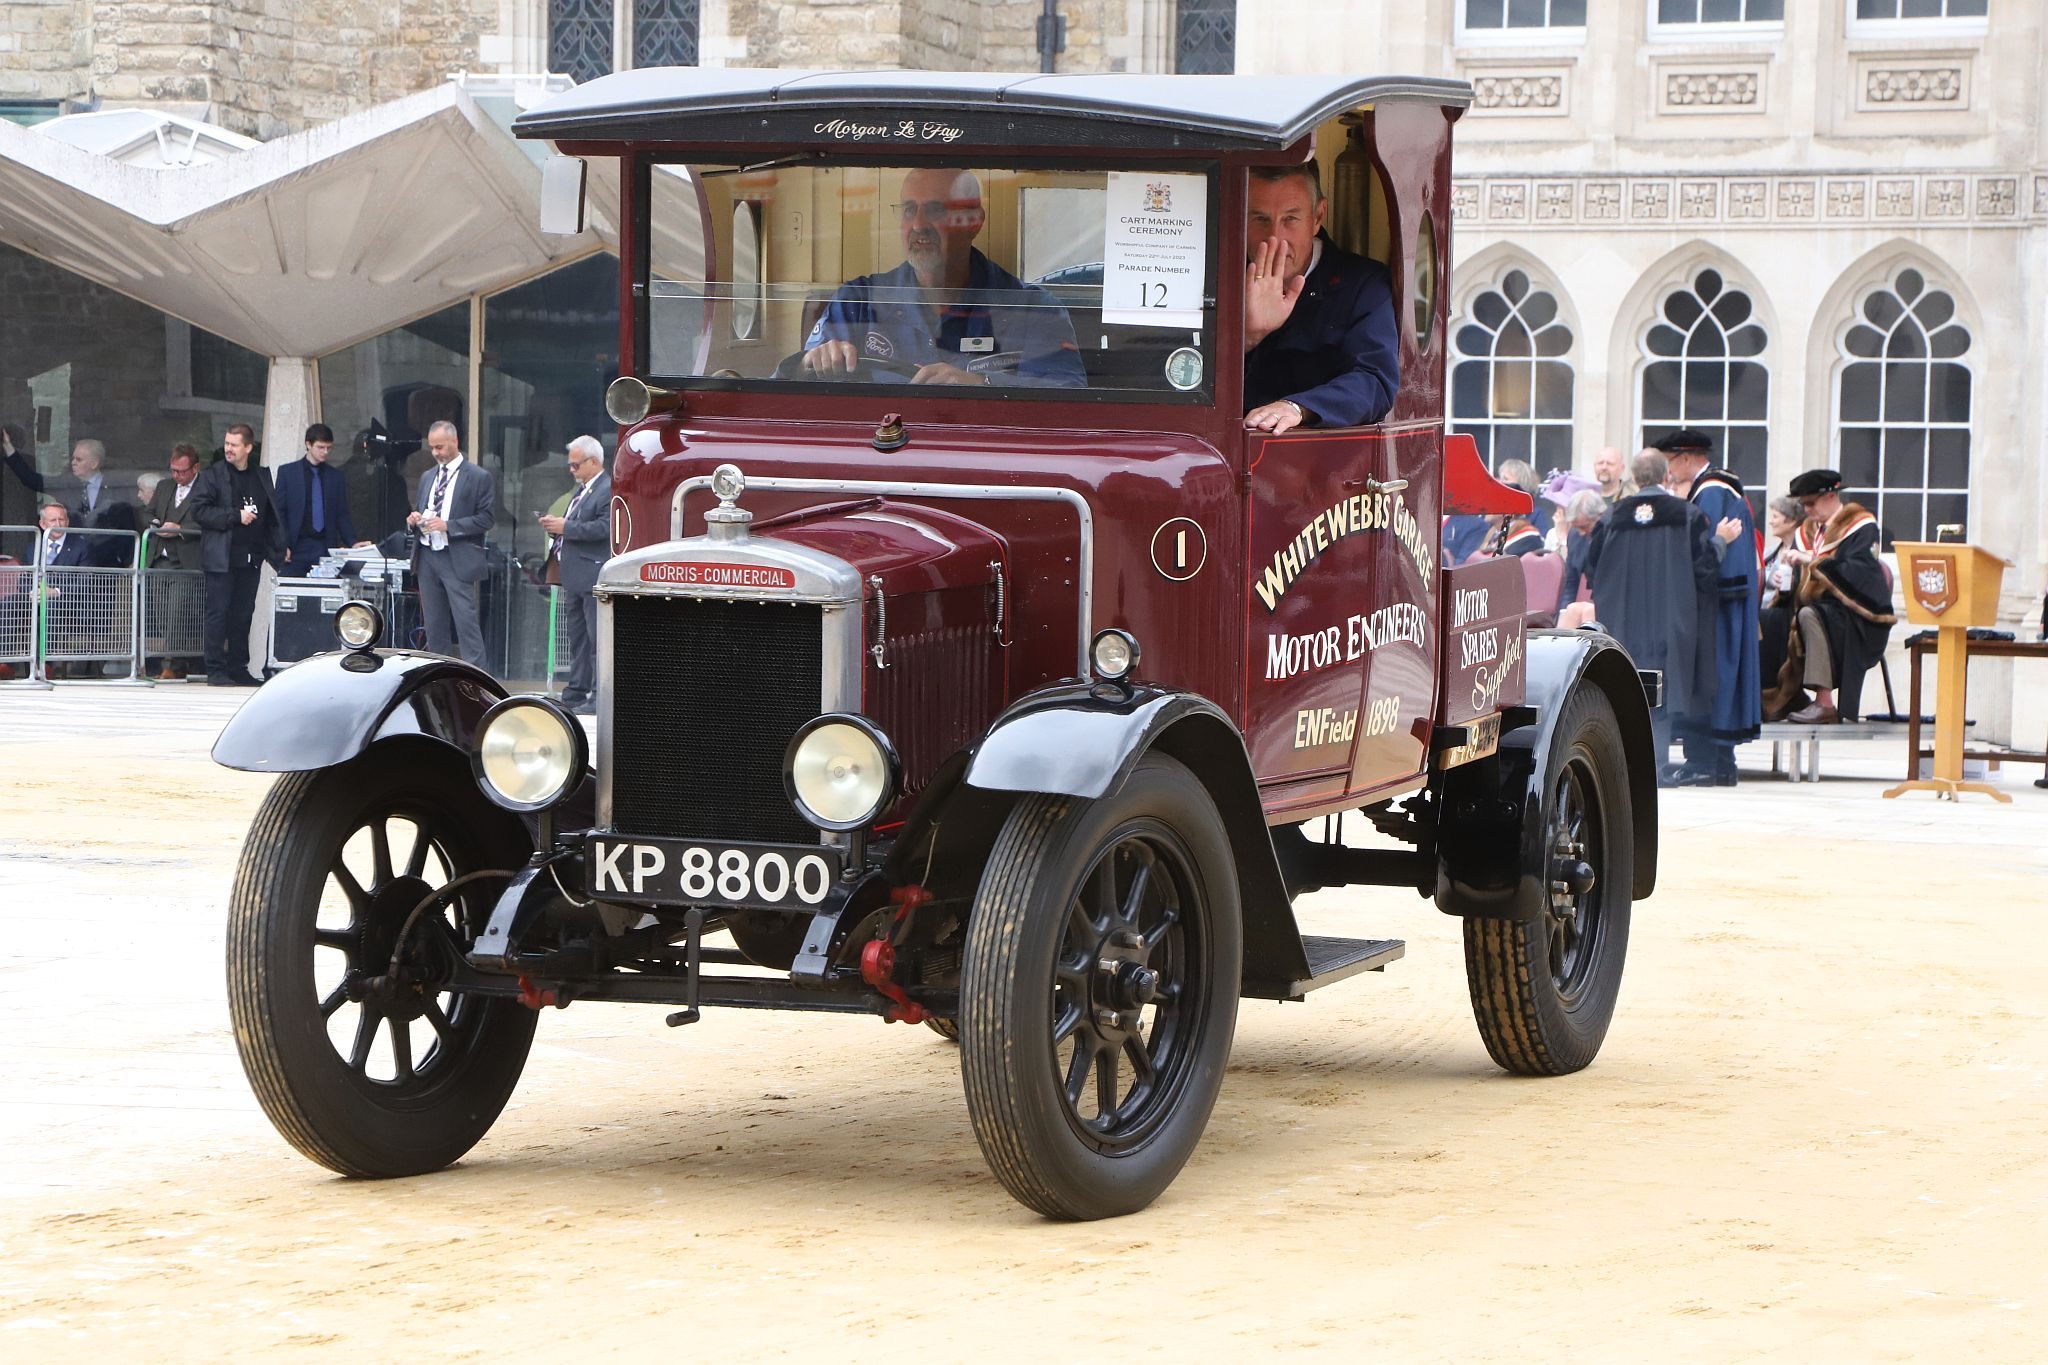 Morris Commercial 1929 KP8800. City of London 2023 Cart Marking in Guildhall Yard on 22-Jul-2023. Hosted by the Worshipful Company of Carmen with the Lord Mayor of the City of London in attendance. Wooden plates on the vehicles are branded with hot irons to allow them to ply for trade in the Square Mile. Another of the City Livery Company's annual ceremonies.